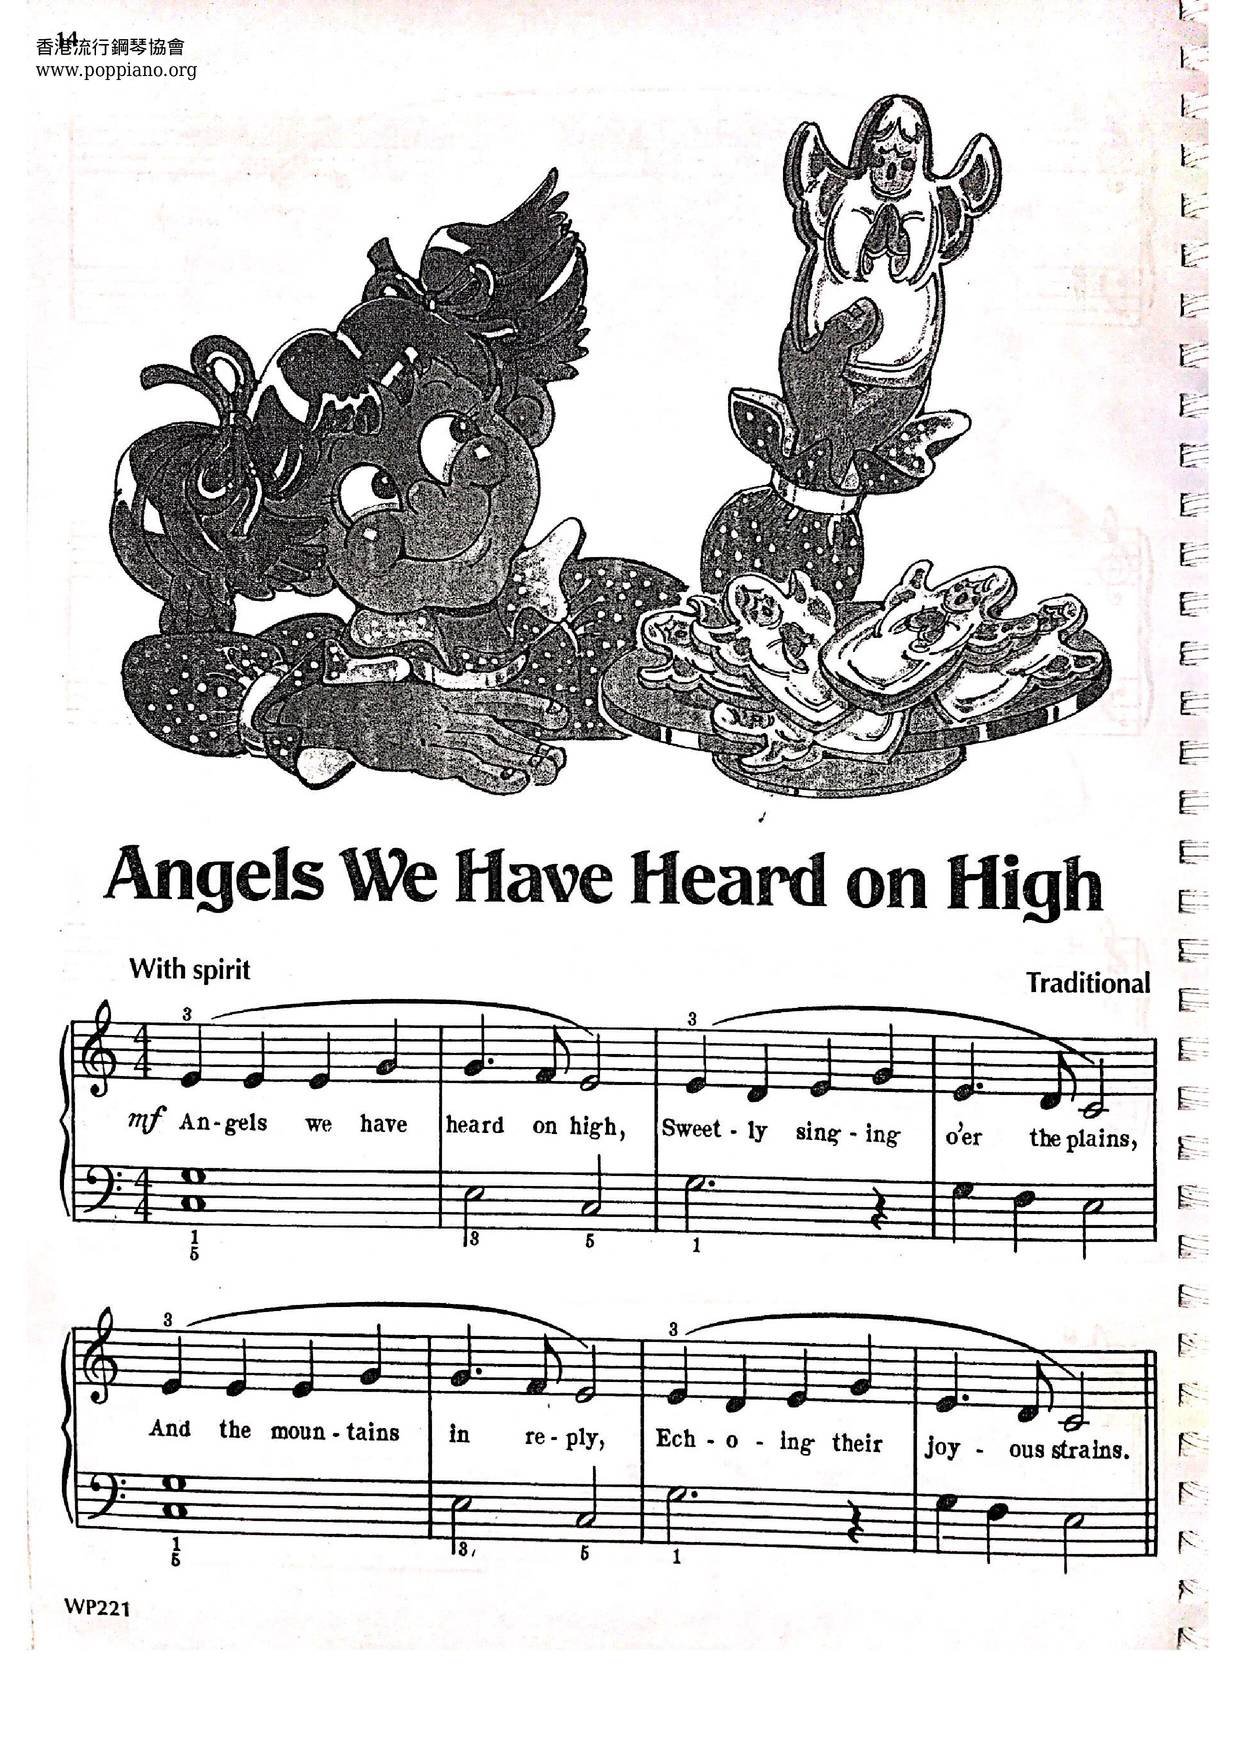 Angels We Have Heard On High Score